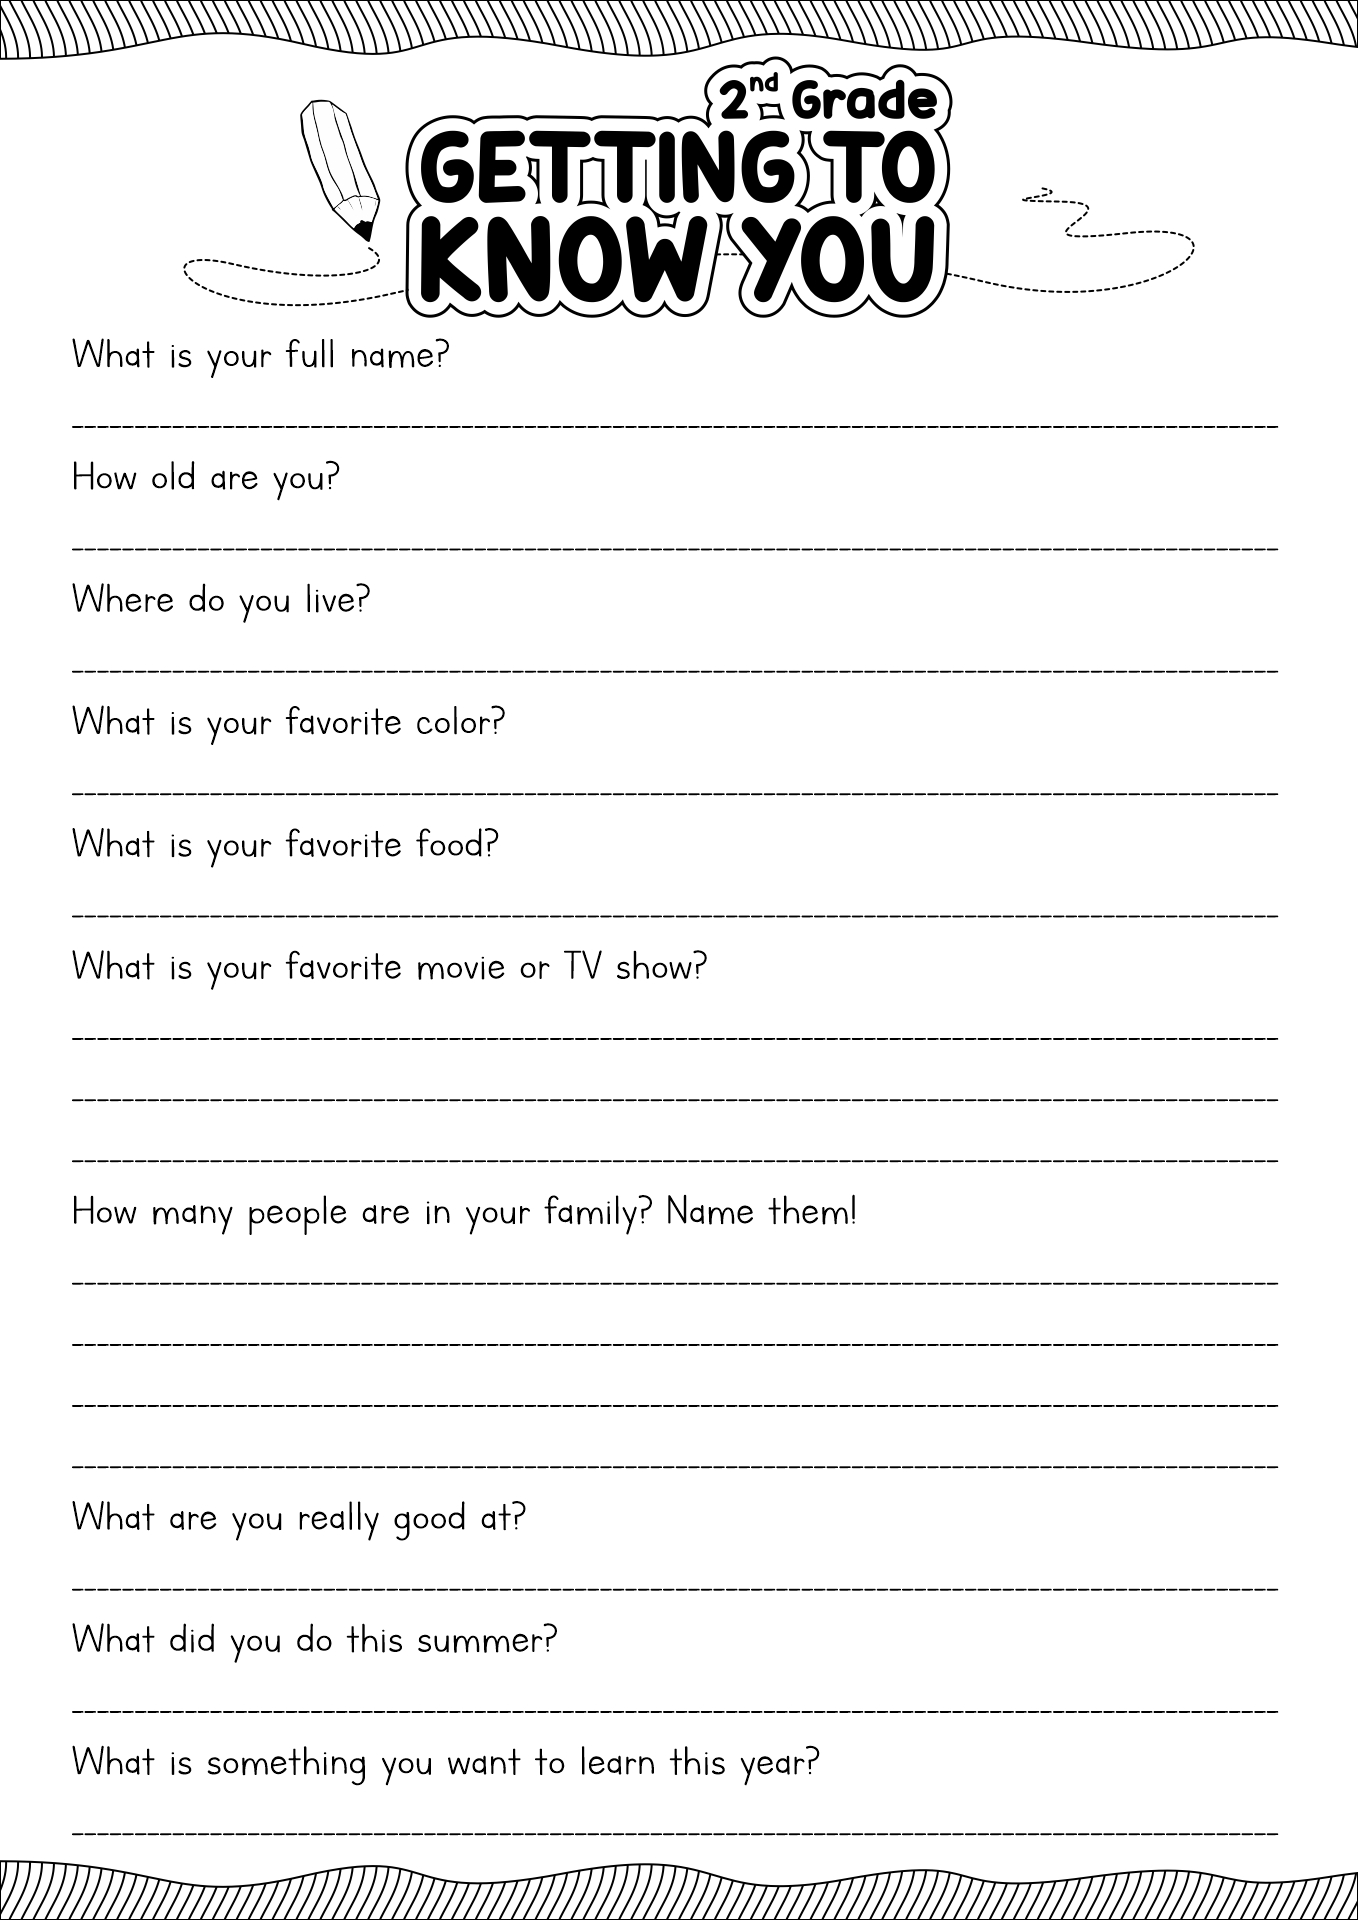 Free Printable Getting To Know You Worksheets Printable Templates